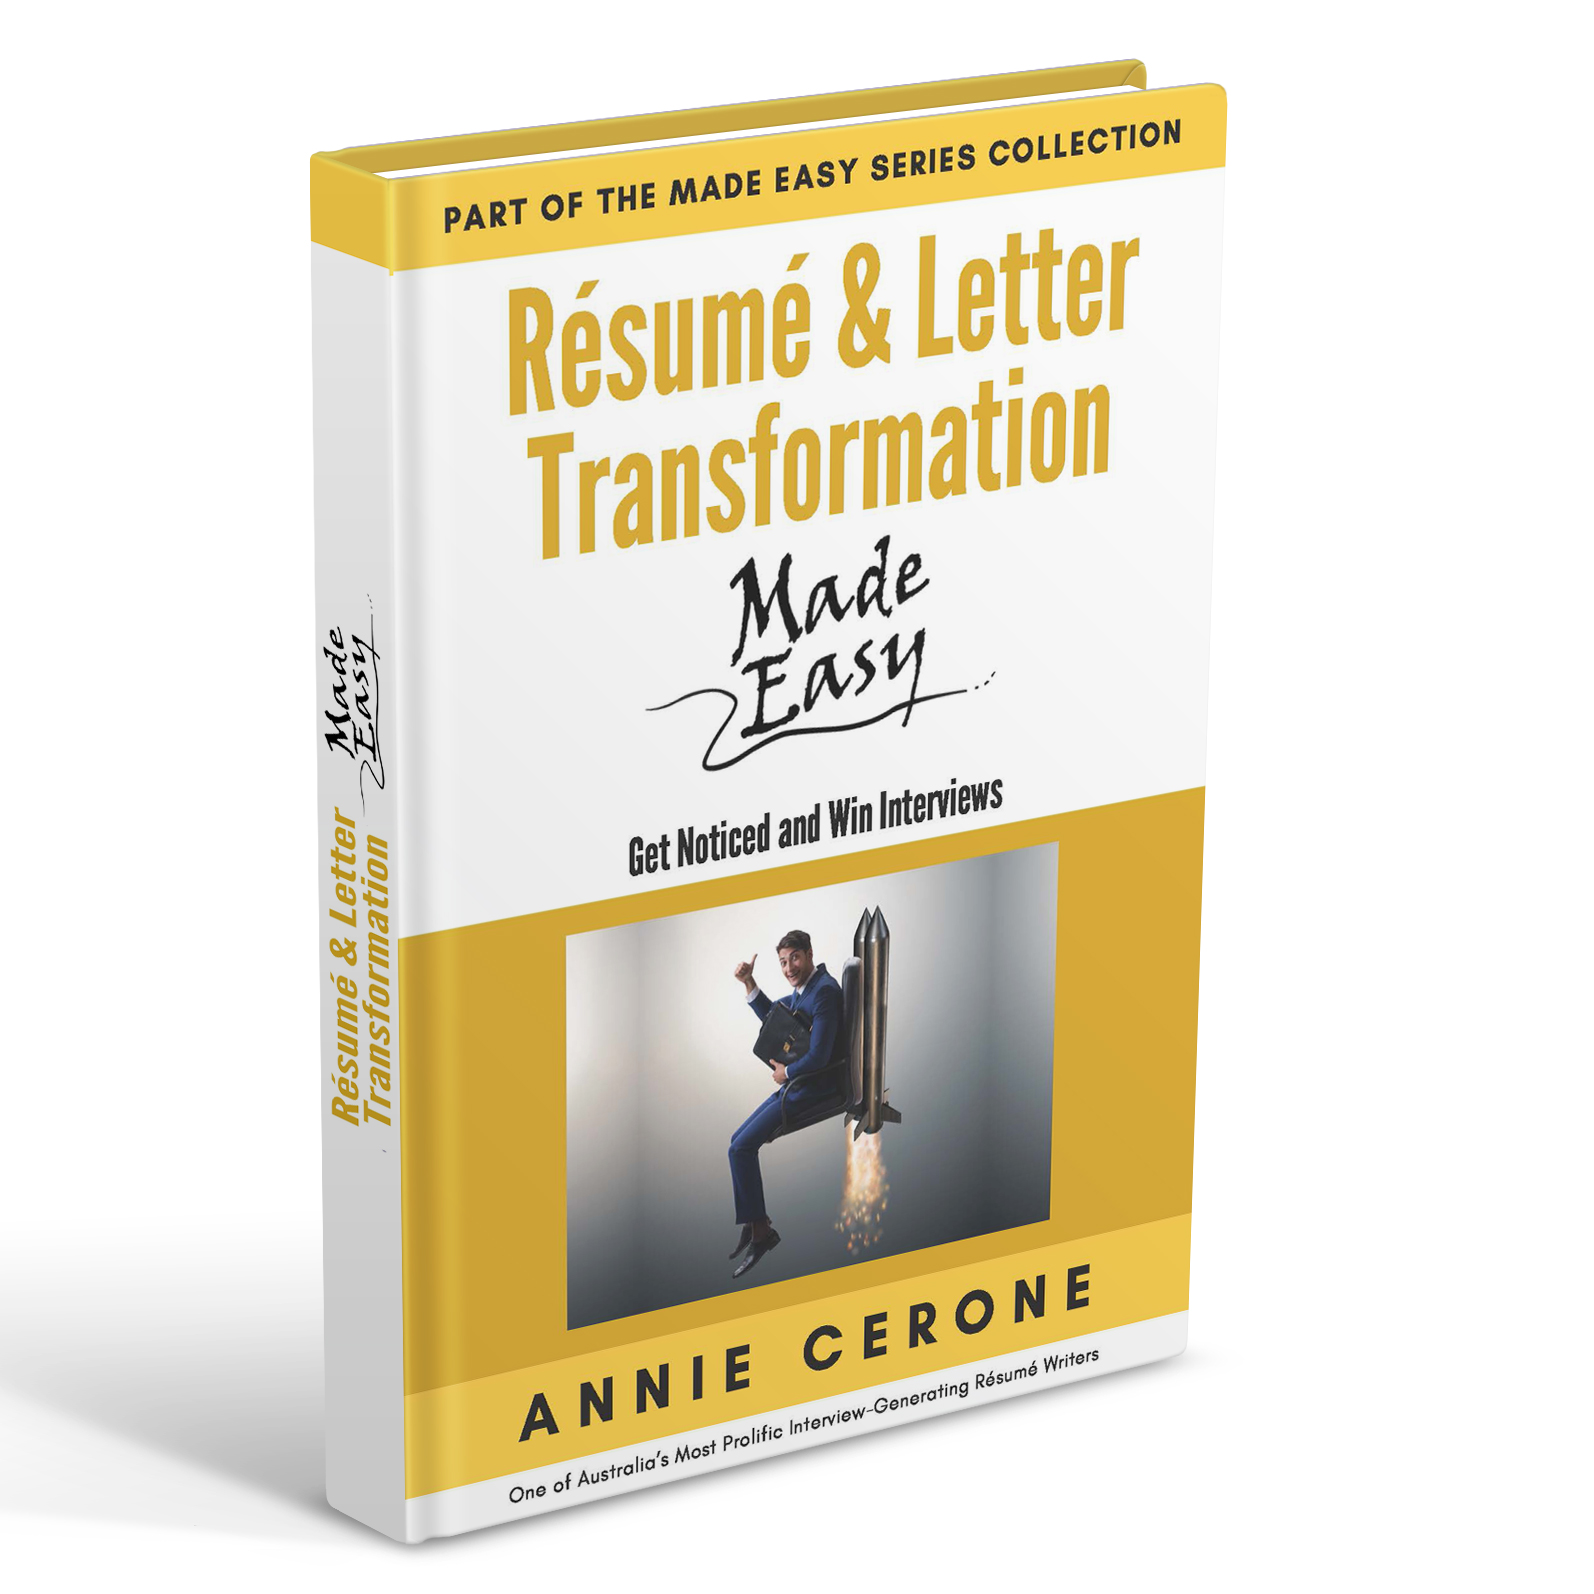 Resume & Letter Transformation Made Easy eBook: Get noticed and win interviews